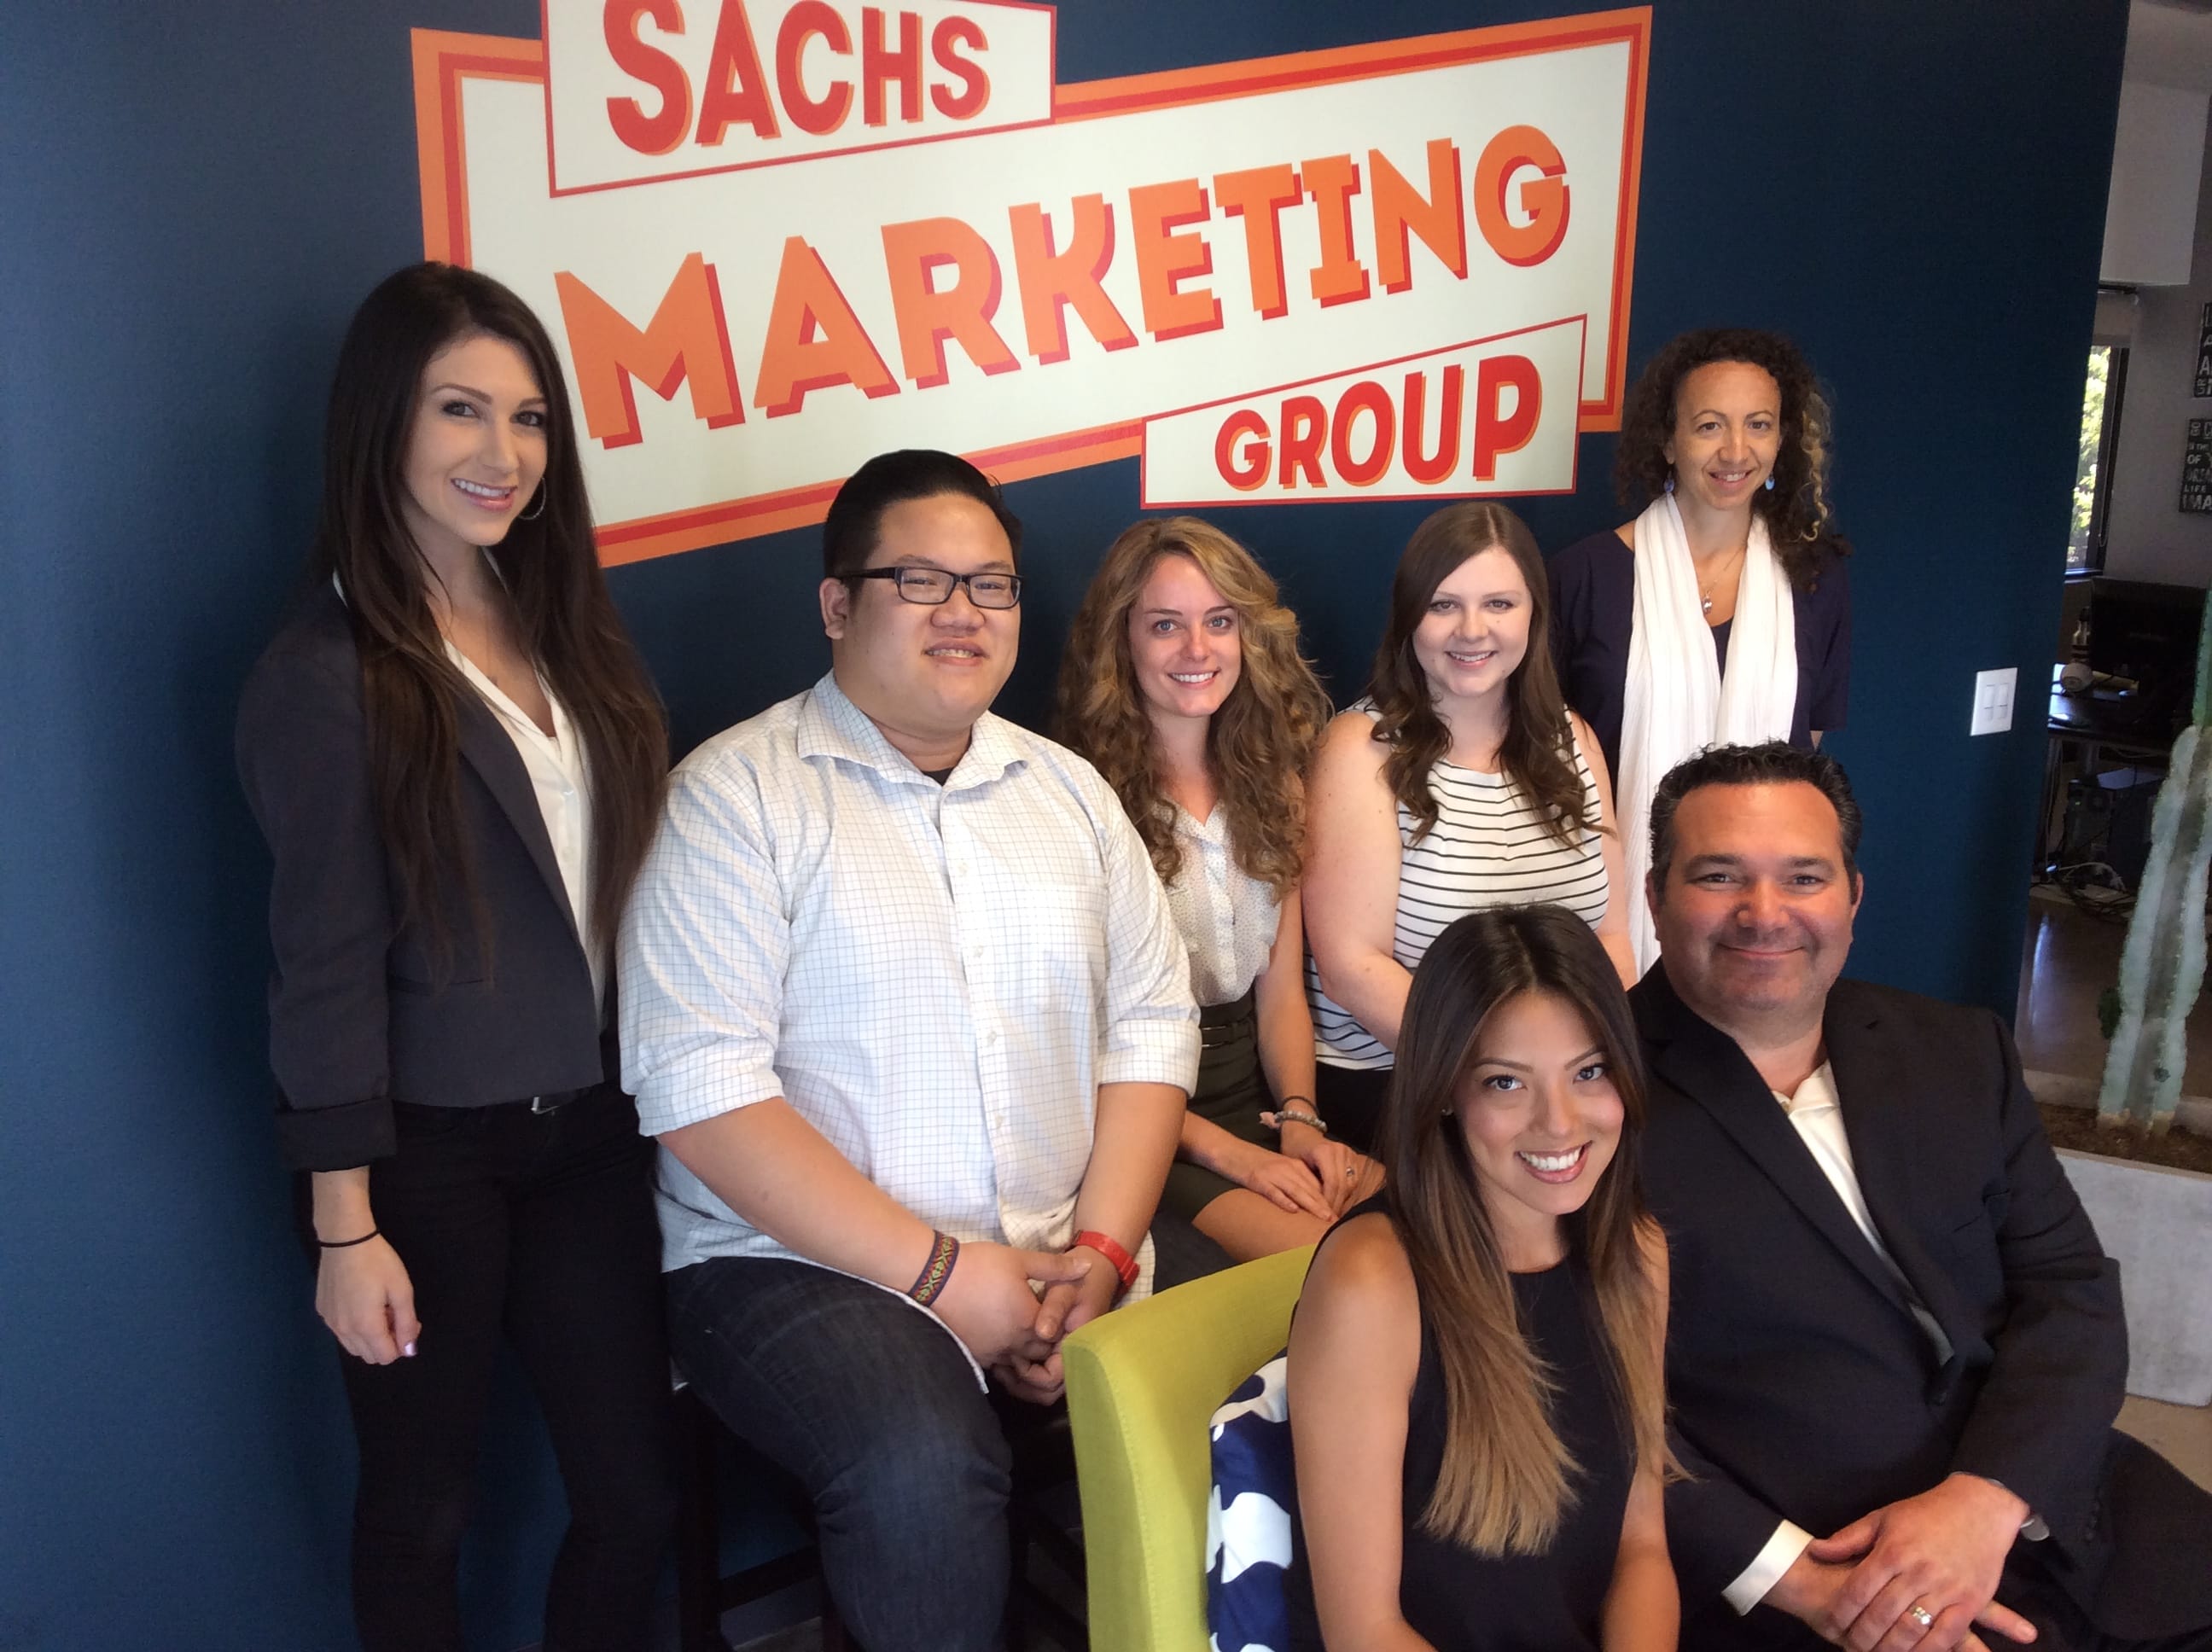 A&E Television Casting Company Filming at Sachs Marketing Group - Photo 1 | Sachs Marketing Group's Blog